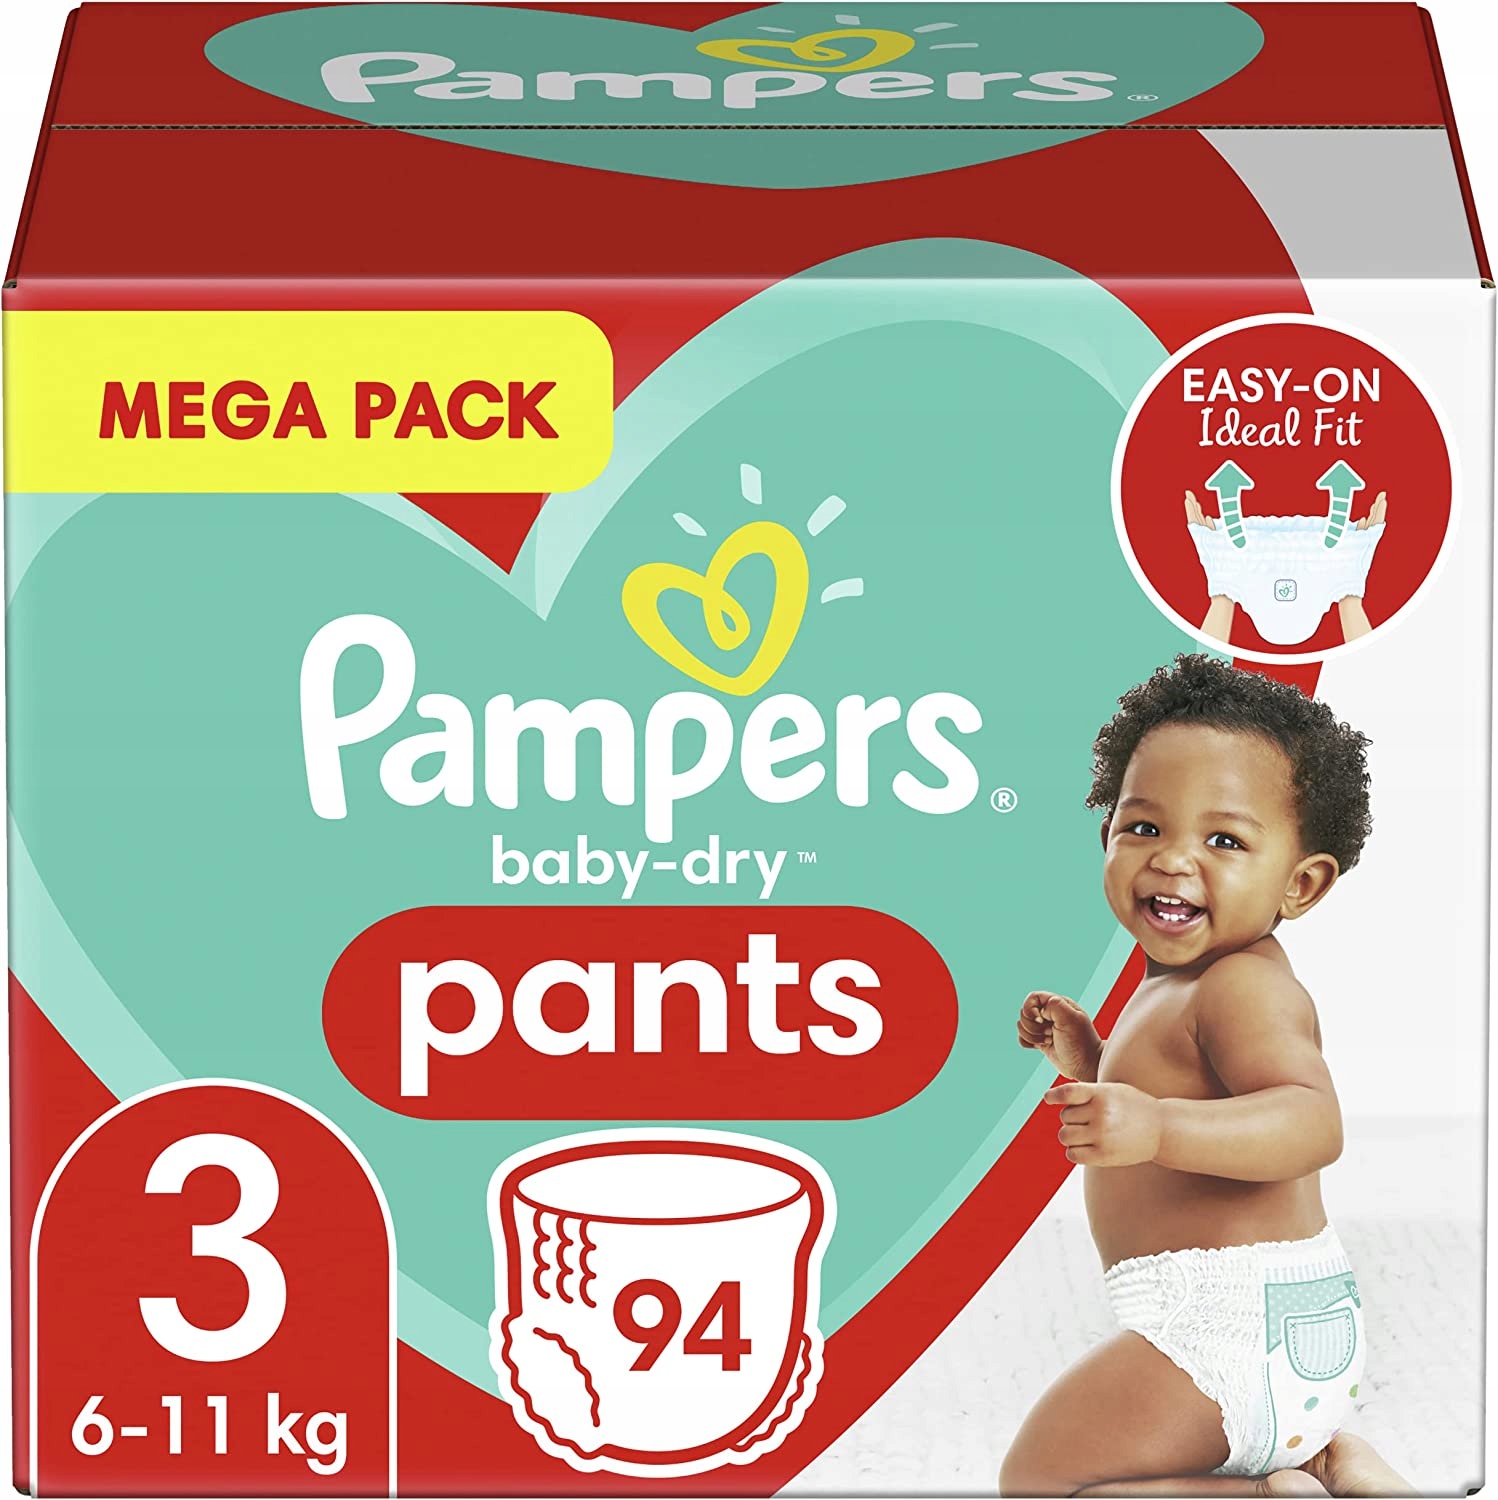 pampers pands w promocji